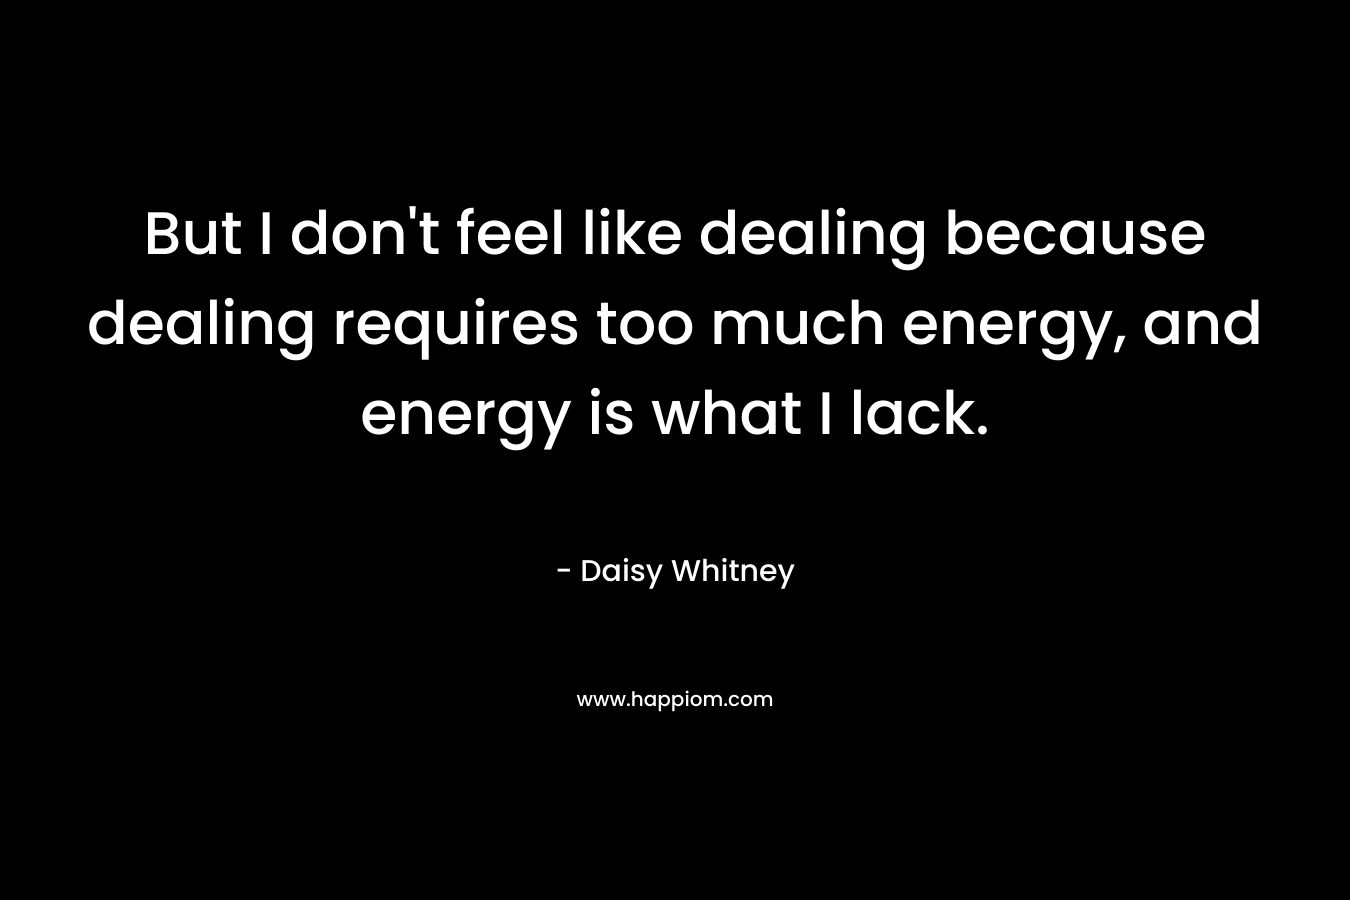 But I don't feel like dealing because dealing requires too much energy, and energy is what I lack.